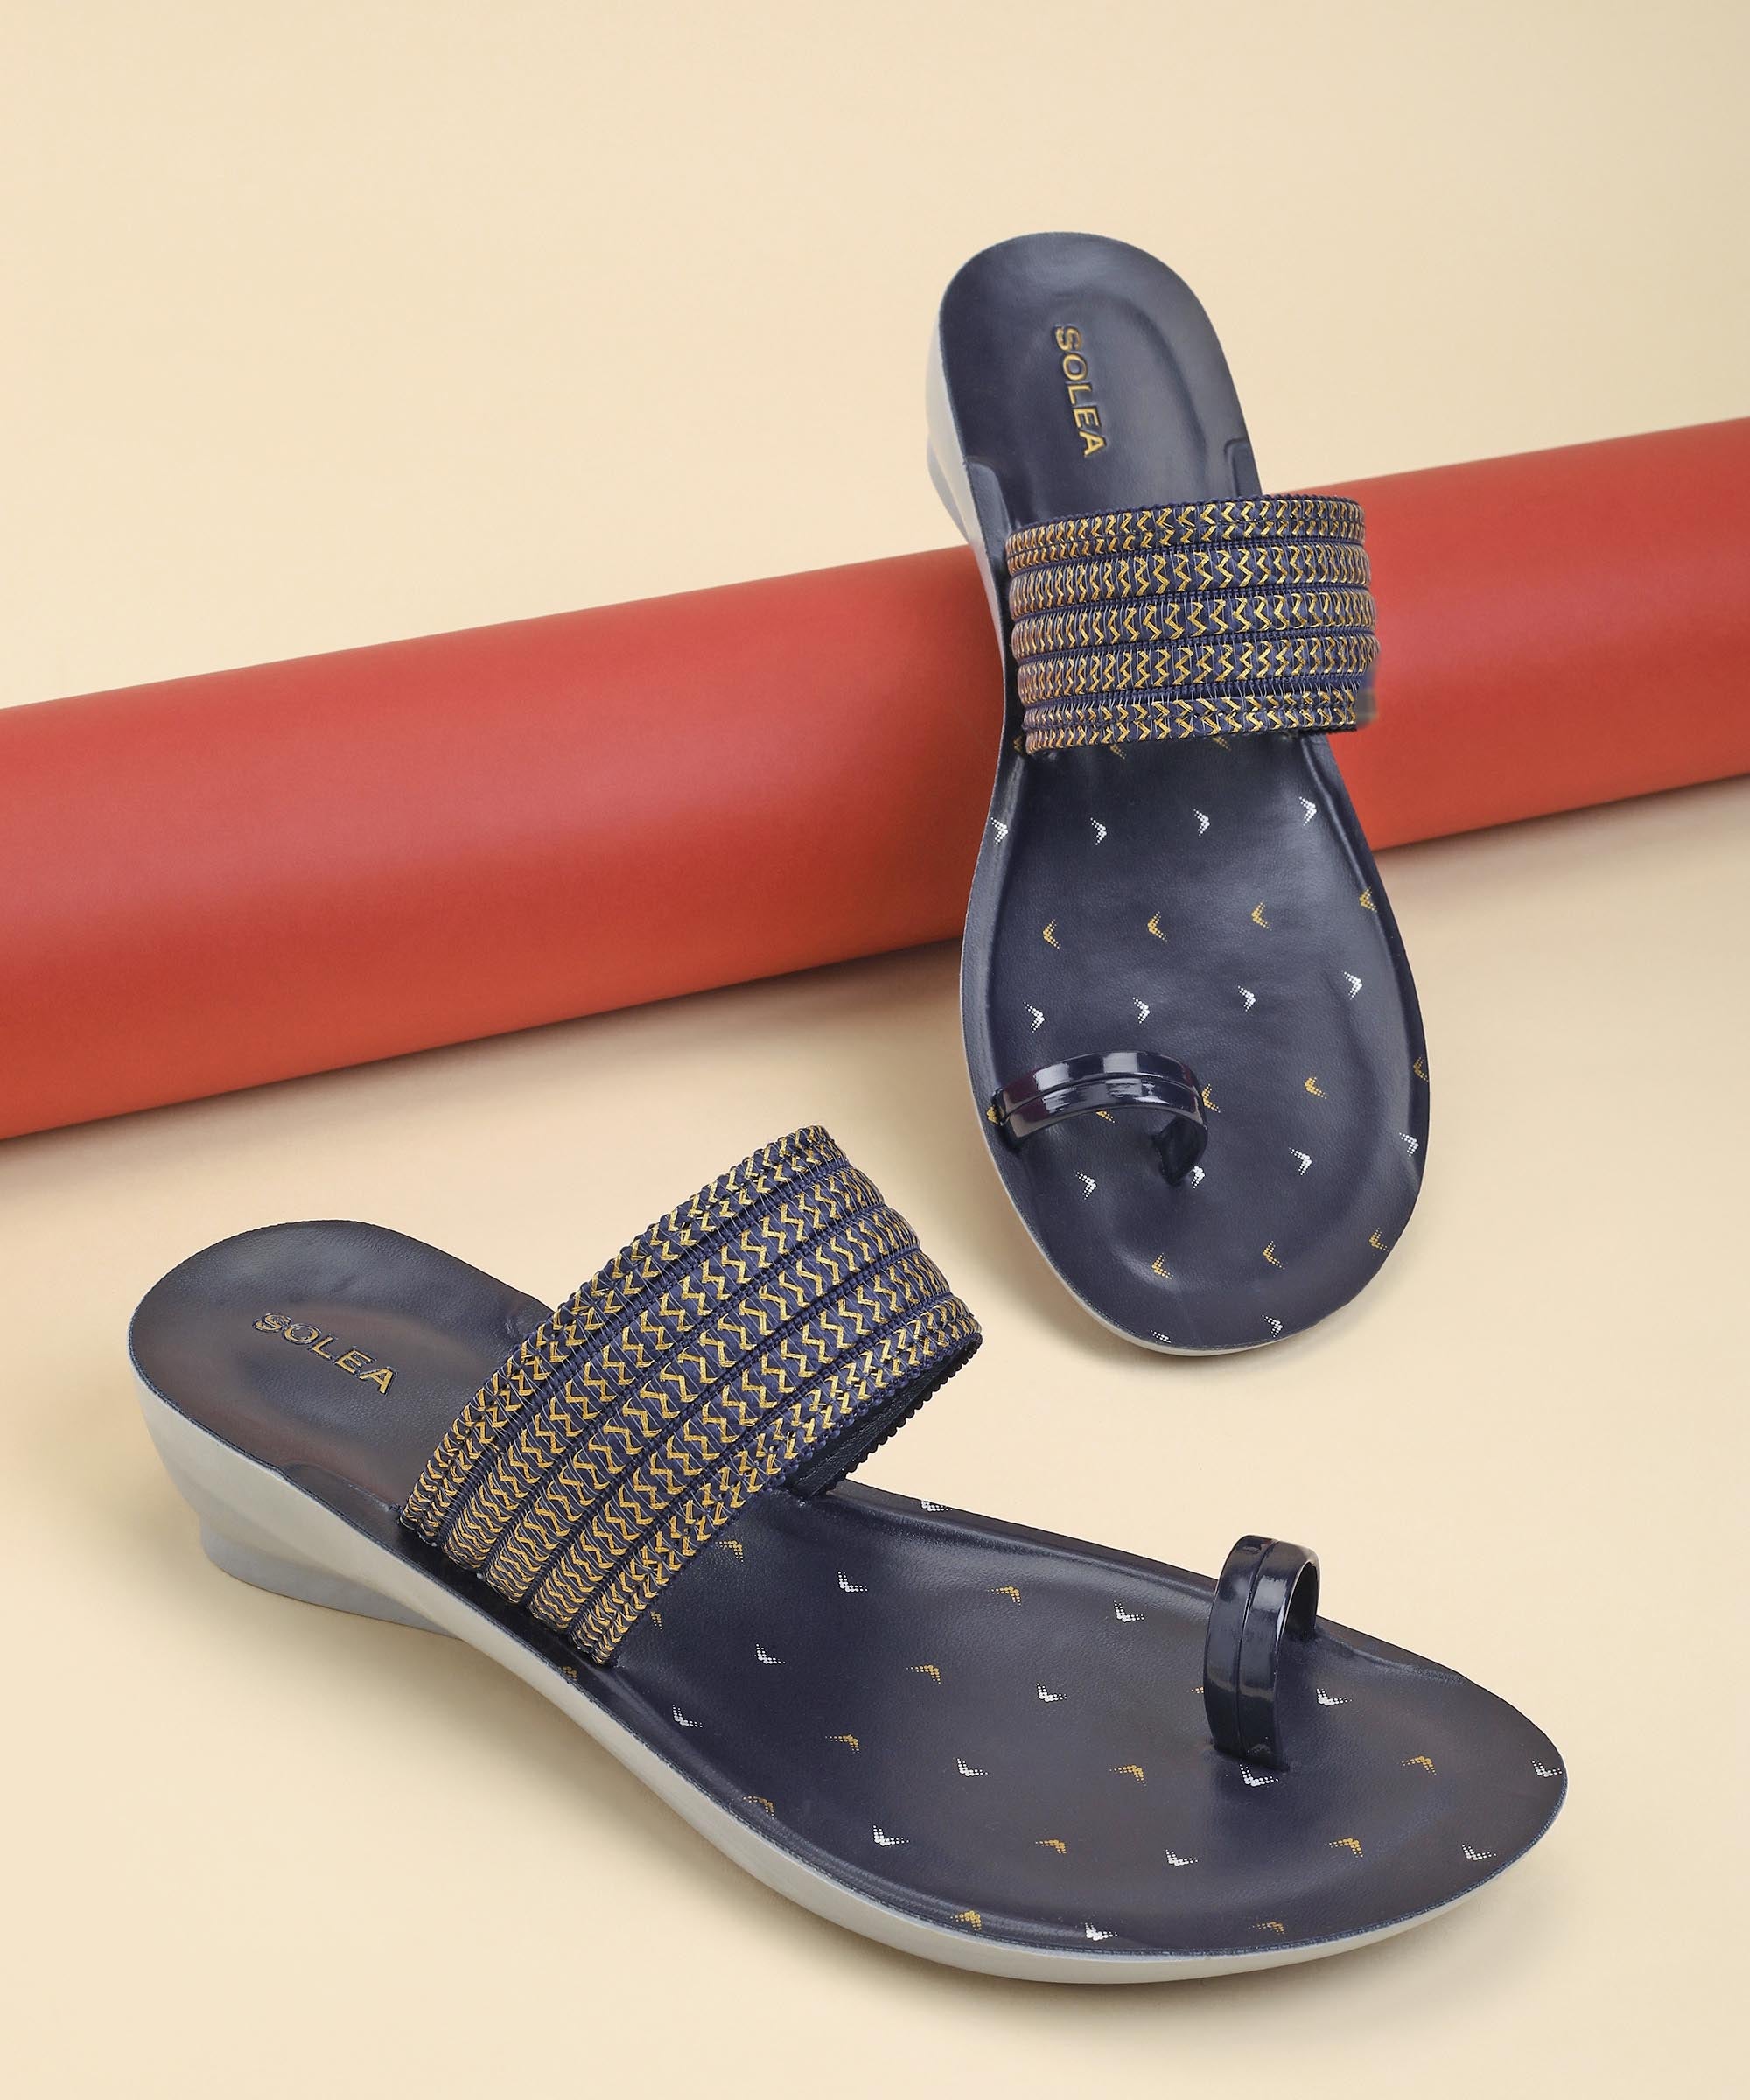 Paragon PUK7014L Women Sandals | Casual &amp; Formal Sandals | Stylish, Comfortable &amp; Durable | For Daily &amp; Occasion Wear